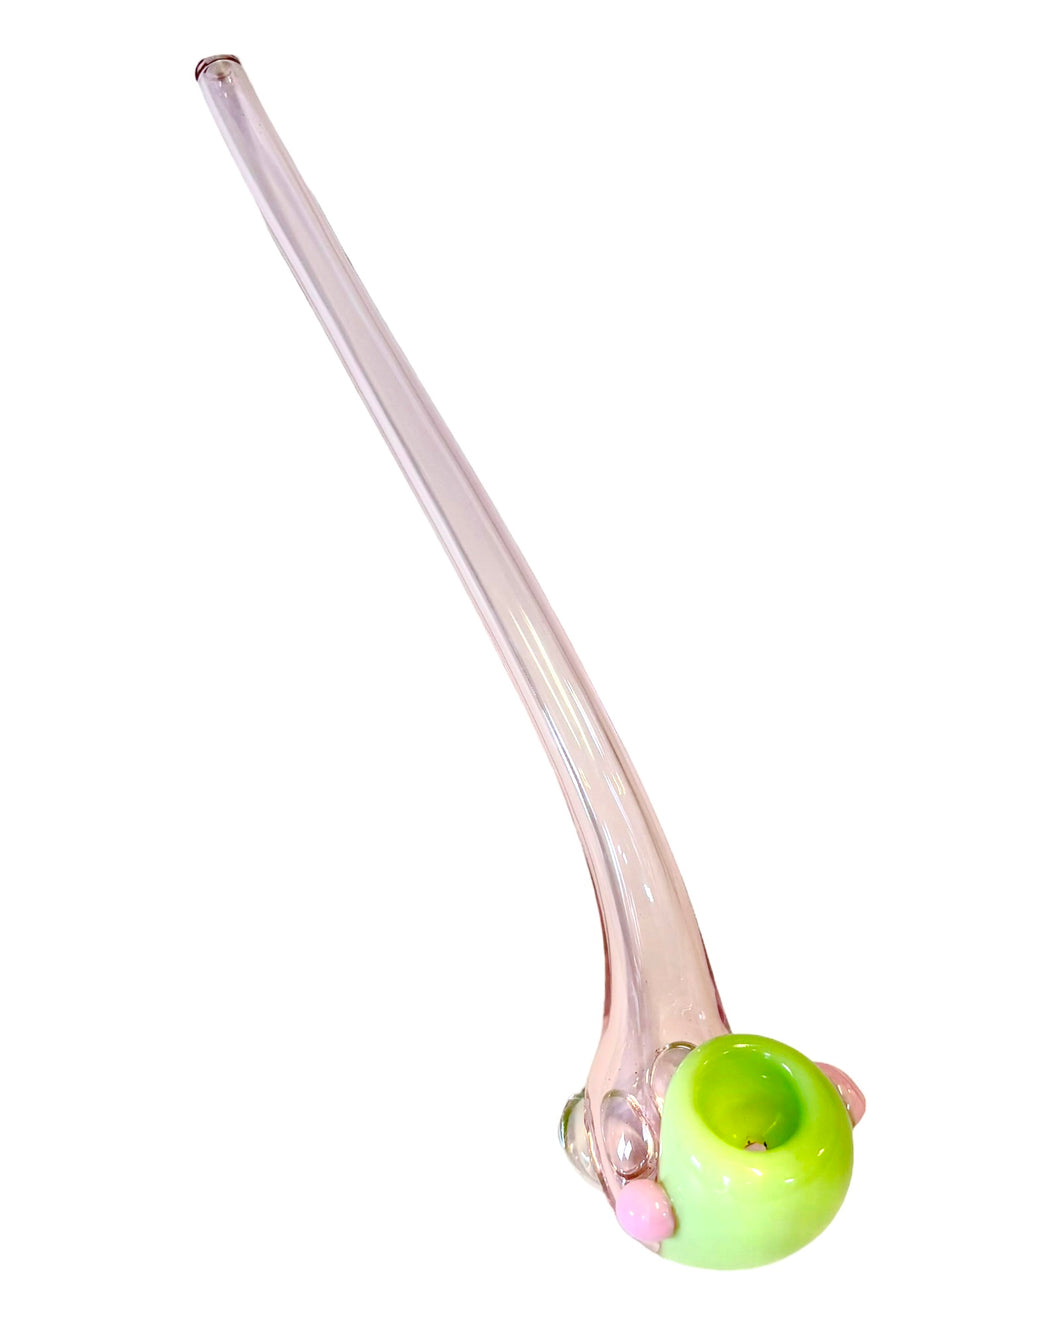 A Slyme Head Double Dot Gandalf Pipe.